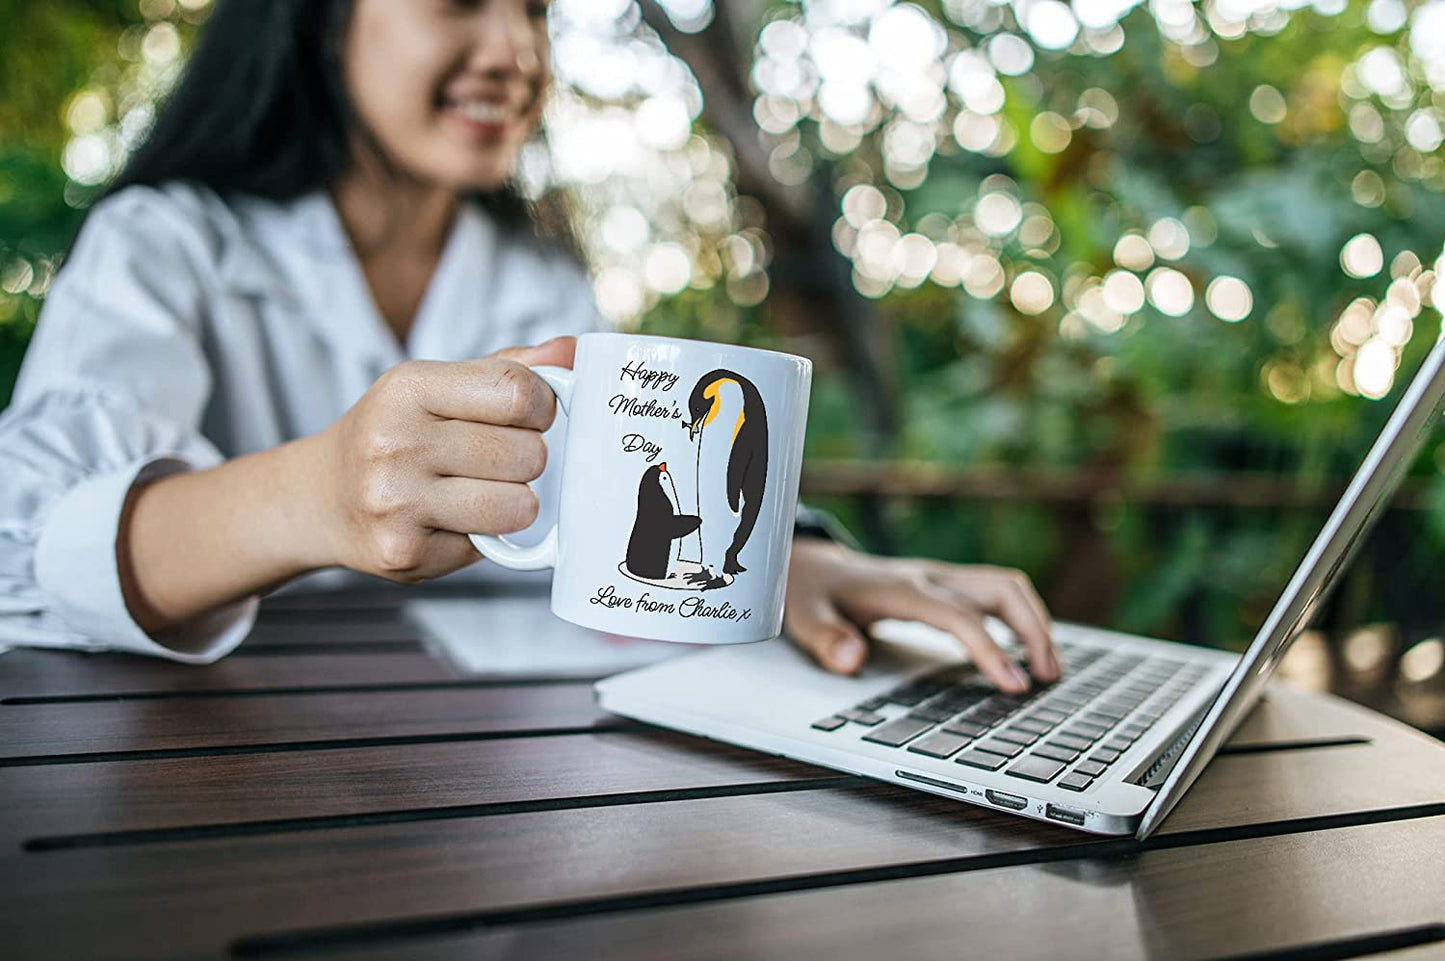 Penguin & Chick Mother's Day Coffee Mug/Tea Cup - Add any personalised message